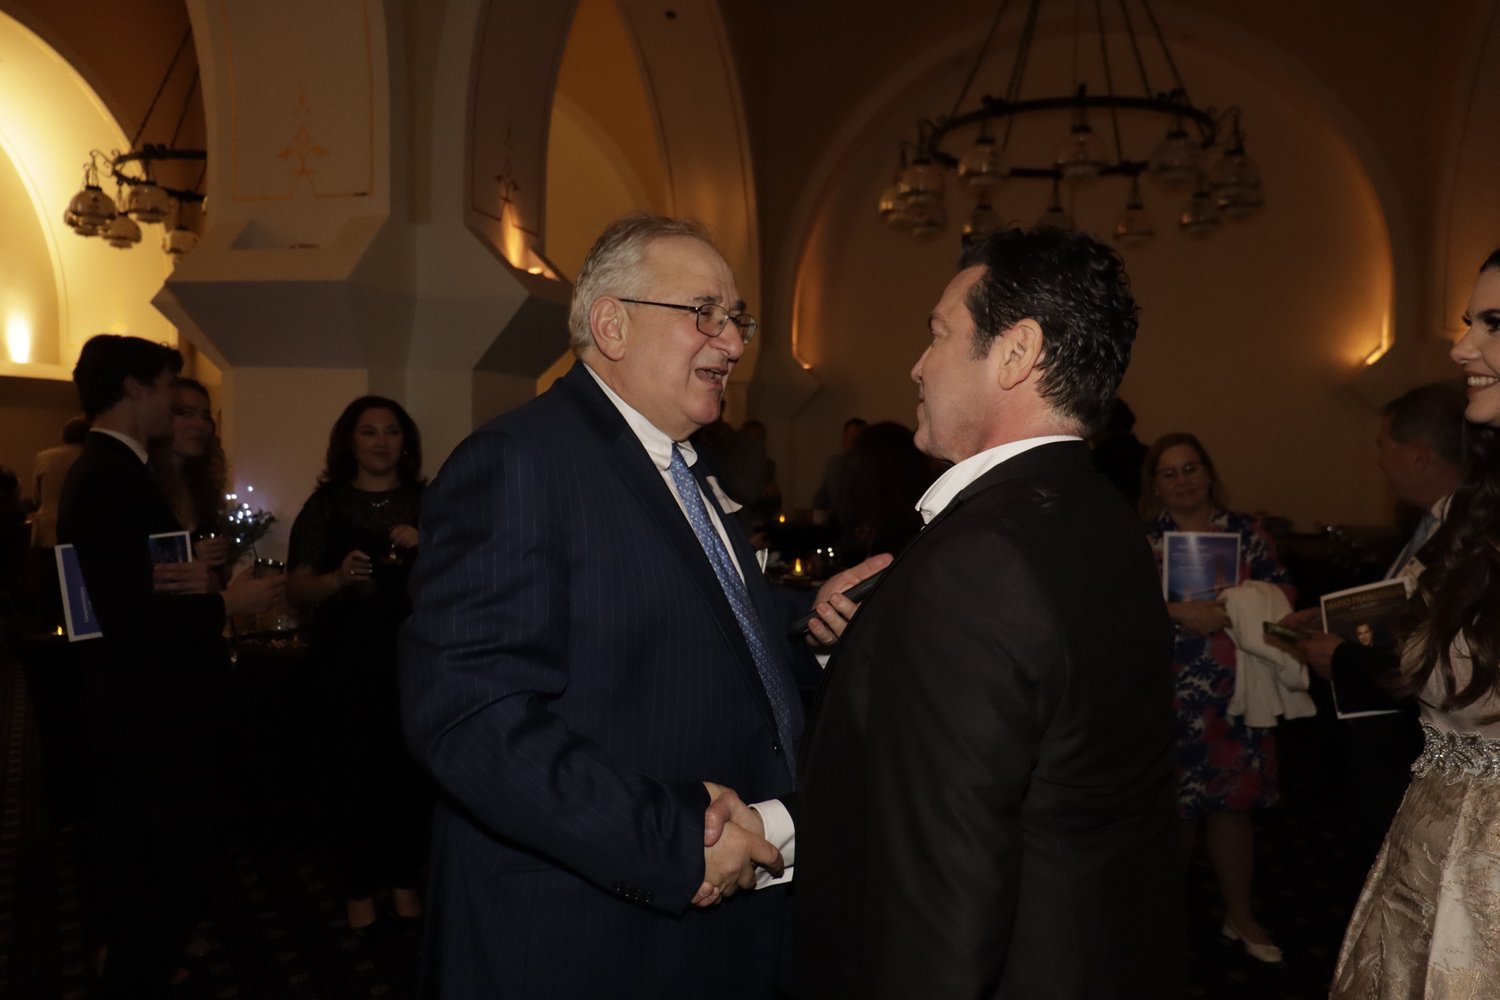  NHS Executive Director Art Dimopoulos speaking with Mario Frangoulis at the concert afterparty. 